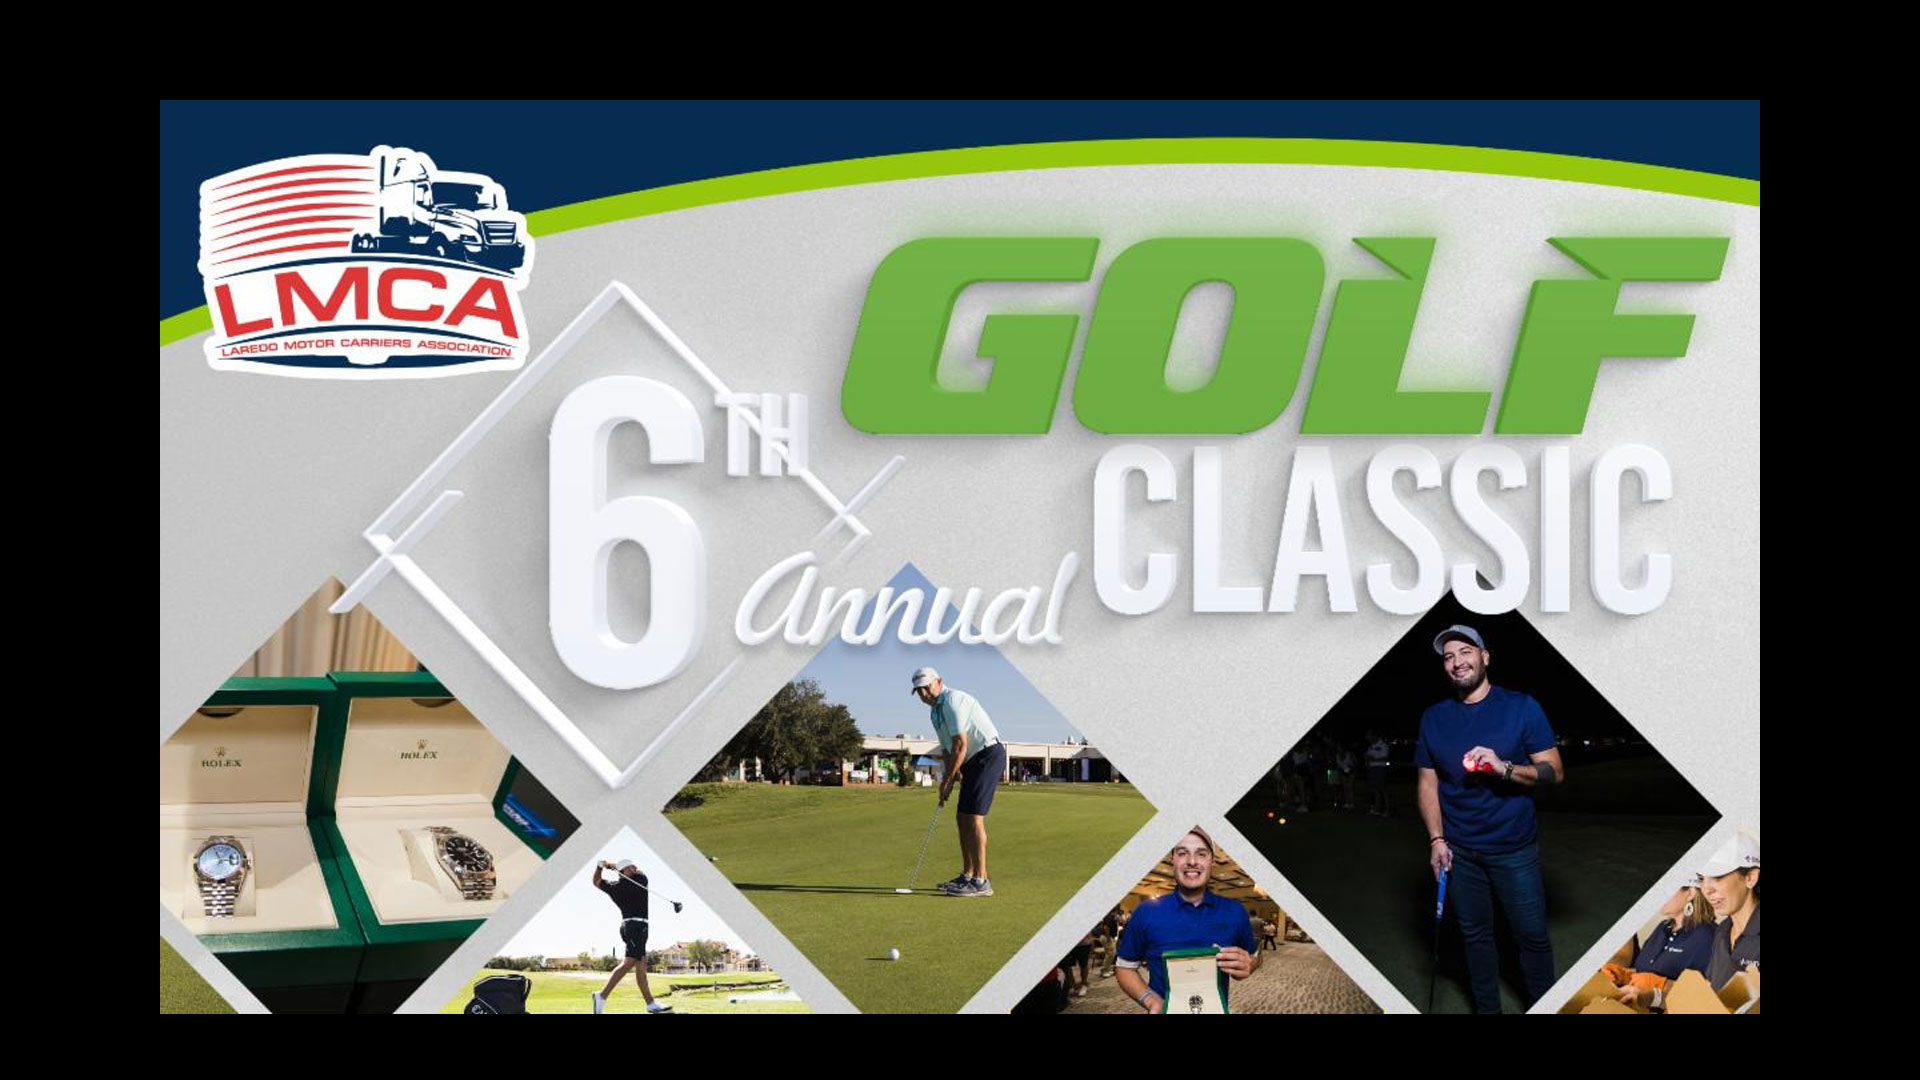 Registration for our 6th Annual  Golf Classic is now open